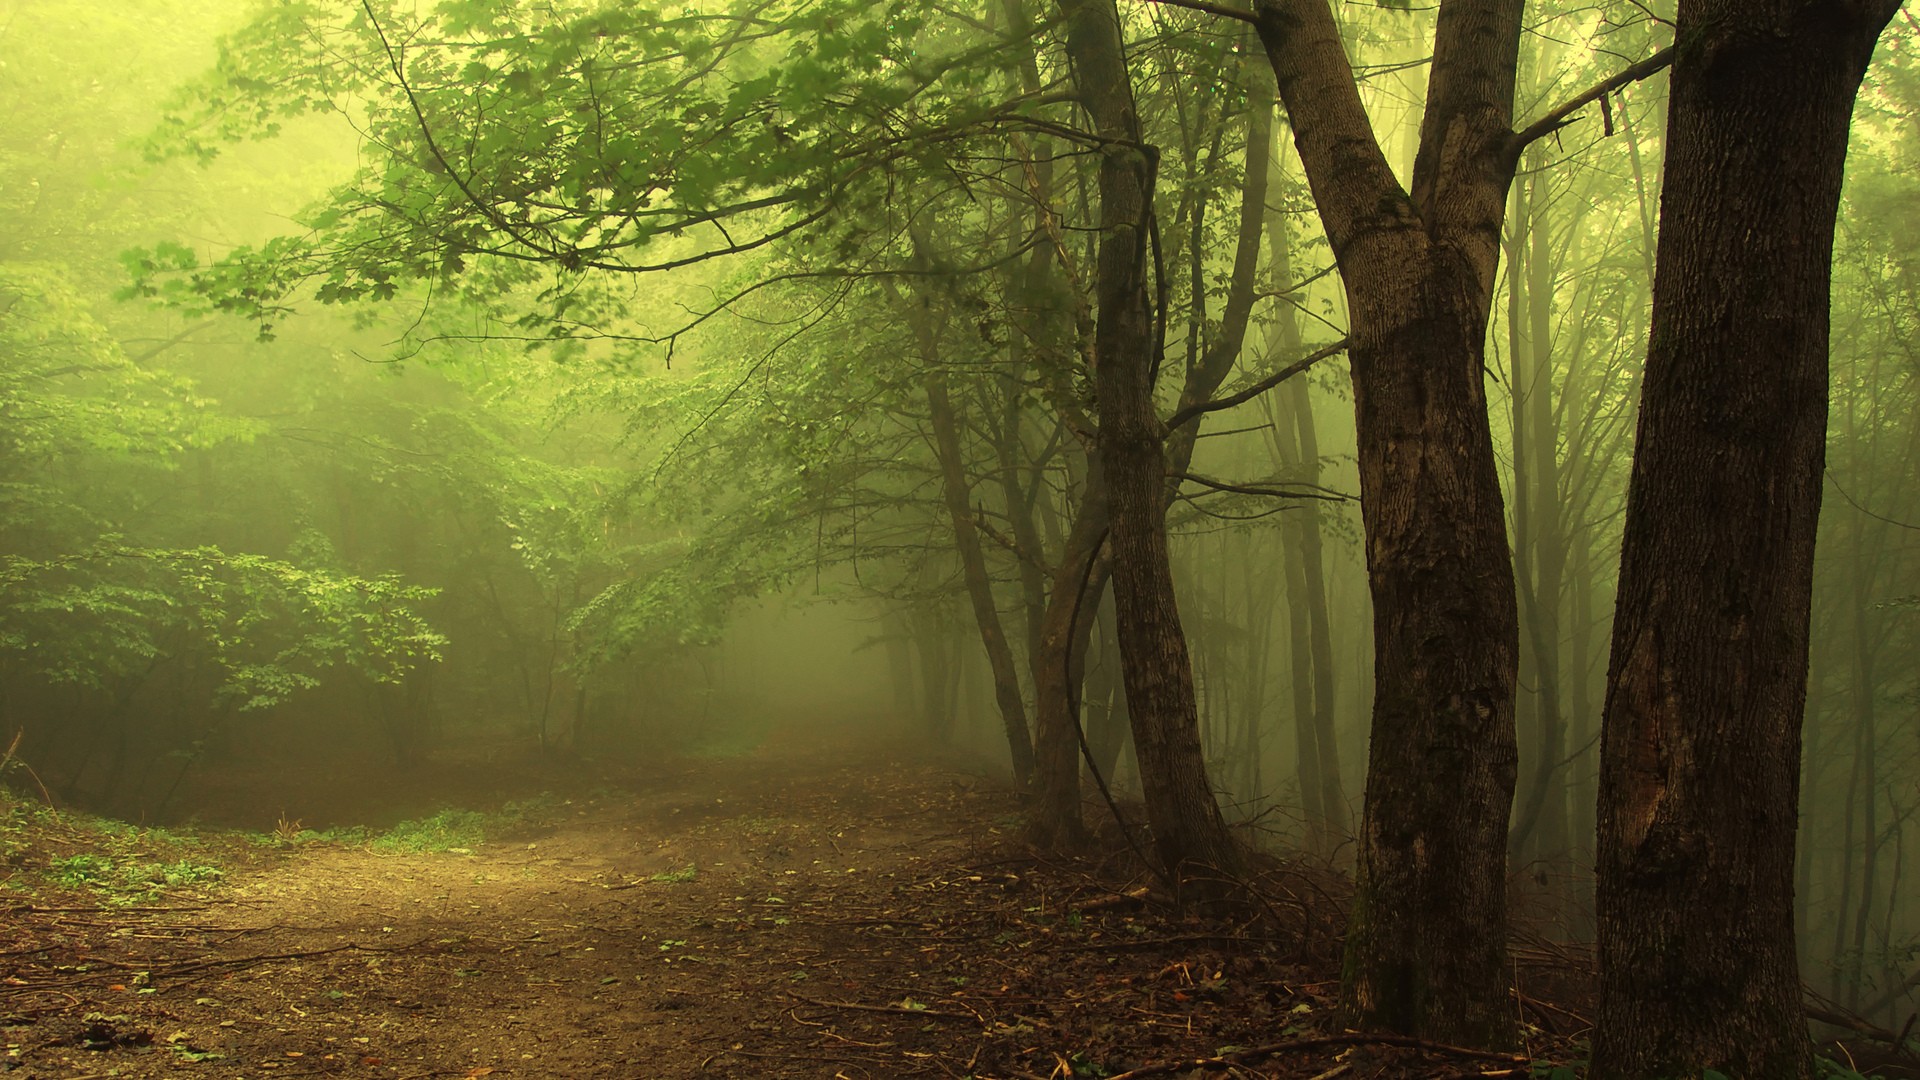 General 1920x1080 forest trees mist nature outdoors plants